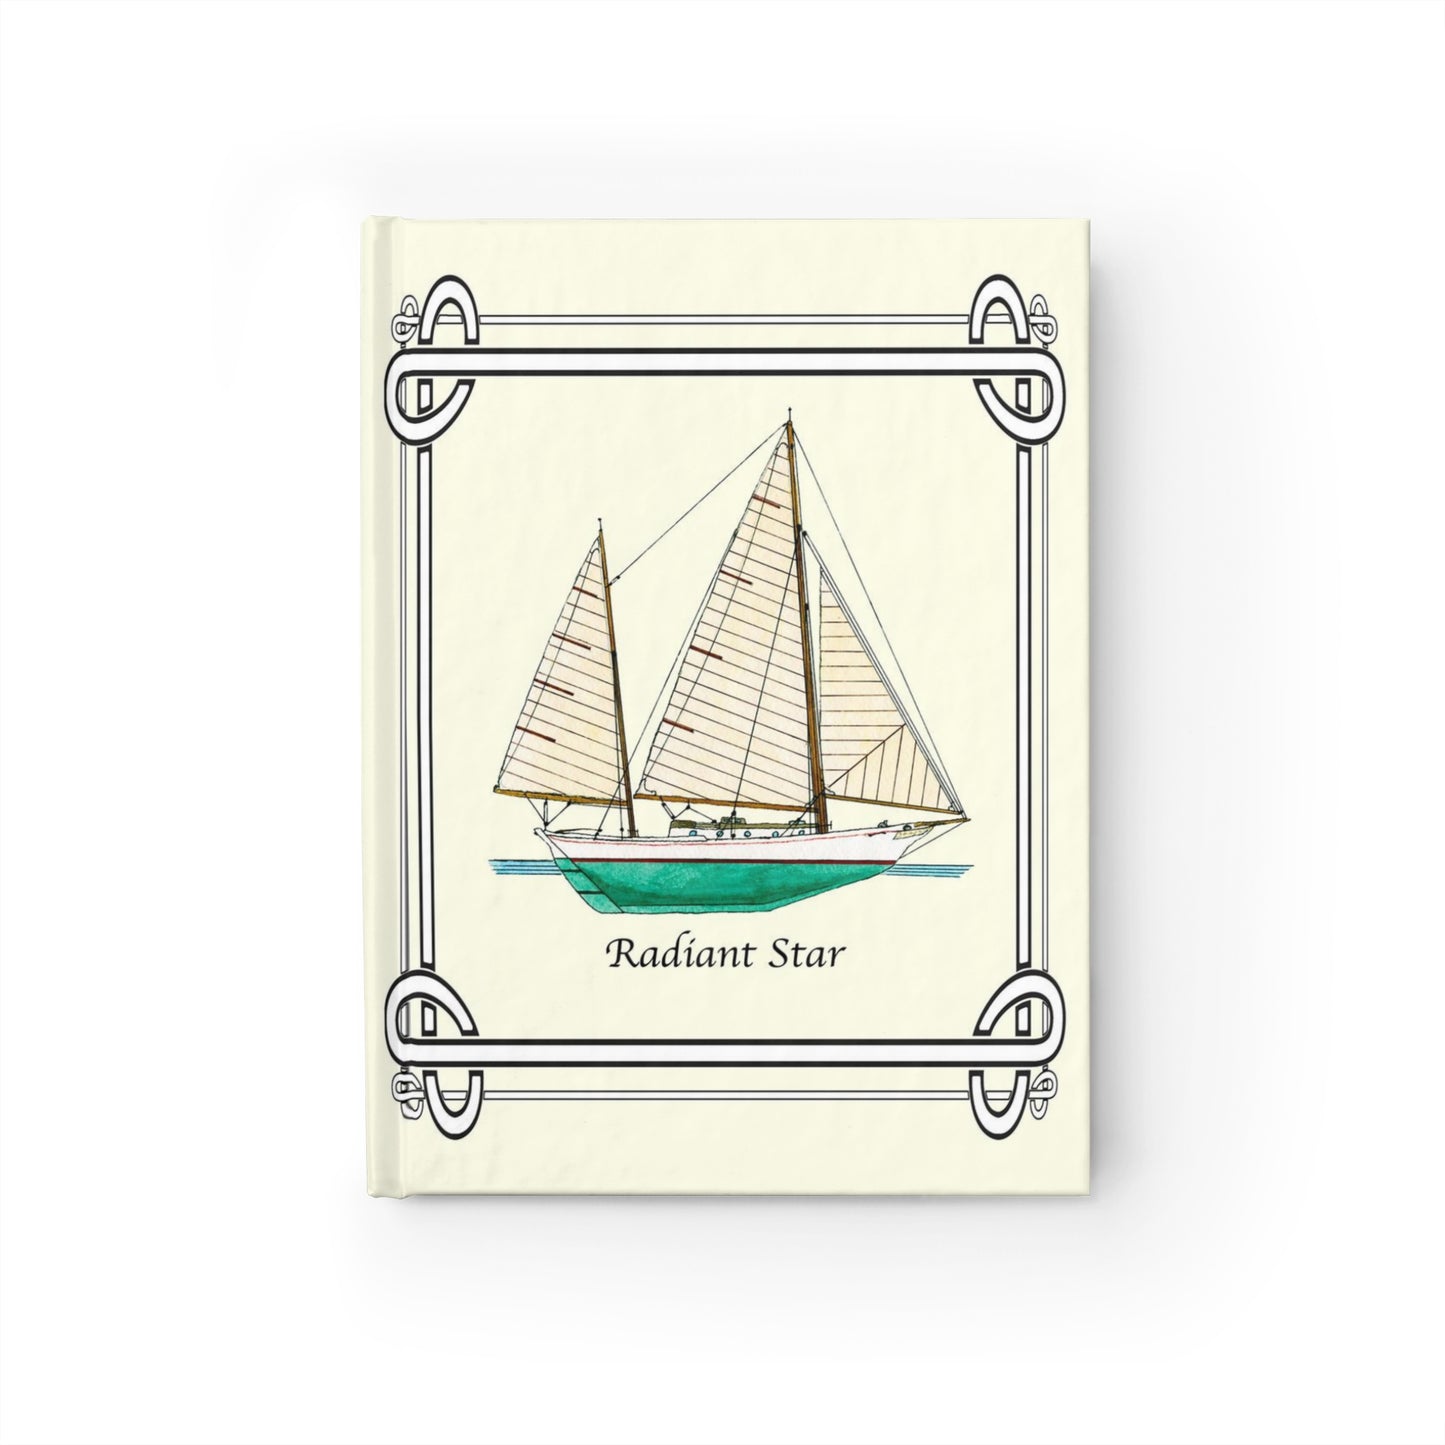 The Radiant Star Clipper Bowed Cruising Ketch has a flat transom, an outboard rudder and clipper bow. Sailing enthusiasts will enjoy using this journal to record their notes and thoughts. A great gift for your favorite sailor!   The journal design is a reproduction of an original watercolor by lee M. Buchanan and has the image on the front and back of the book.